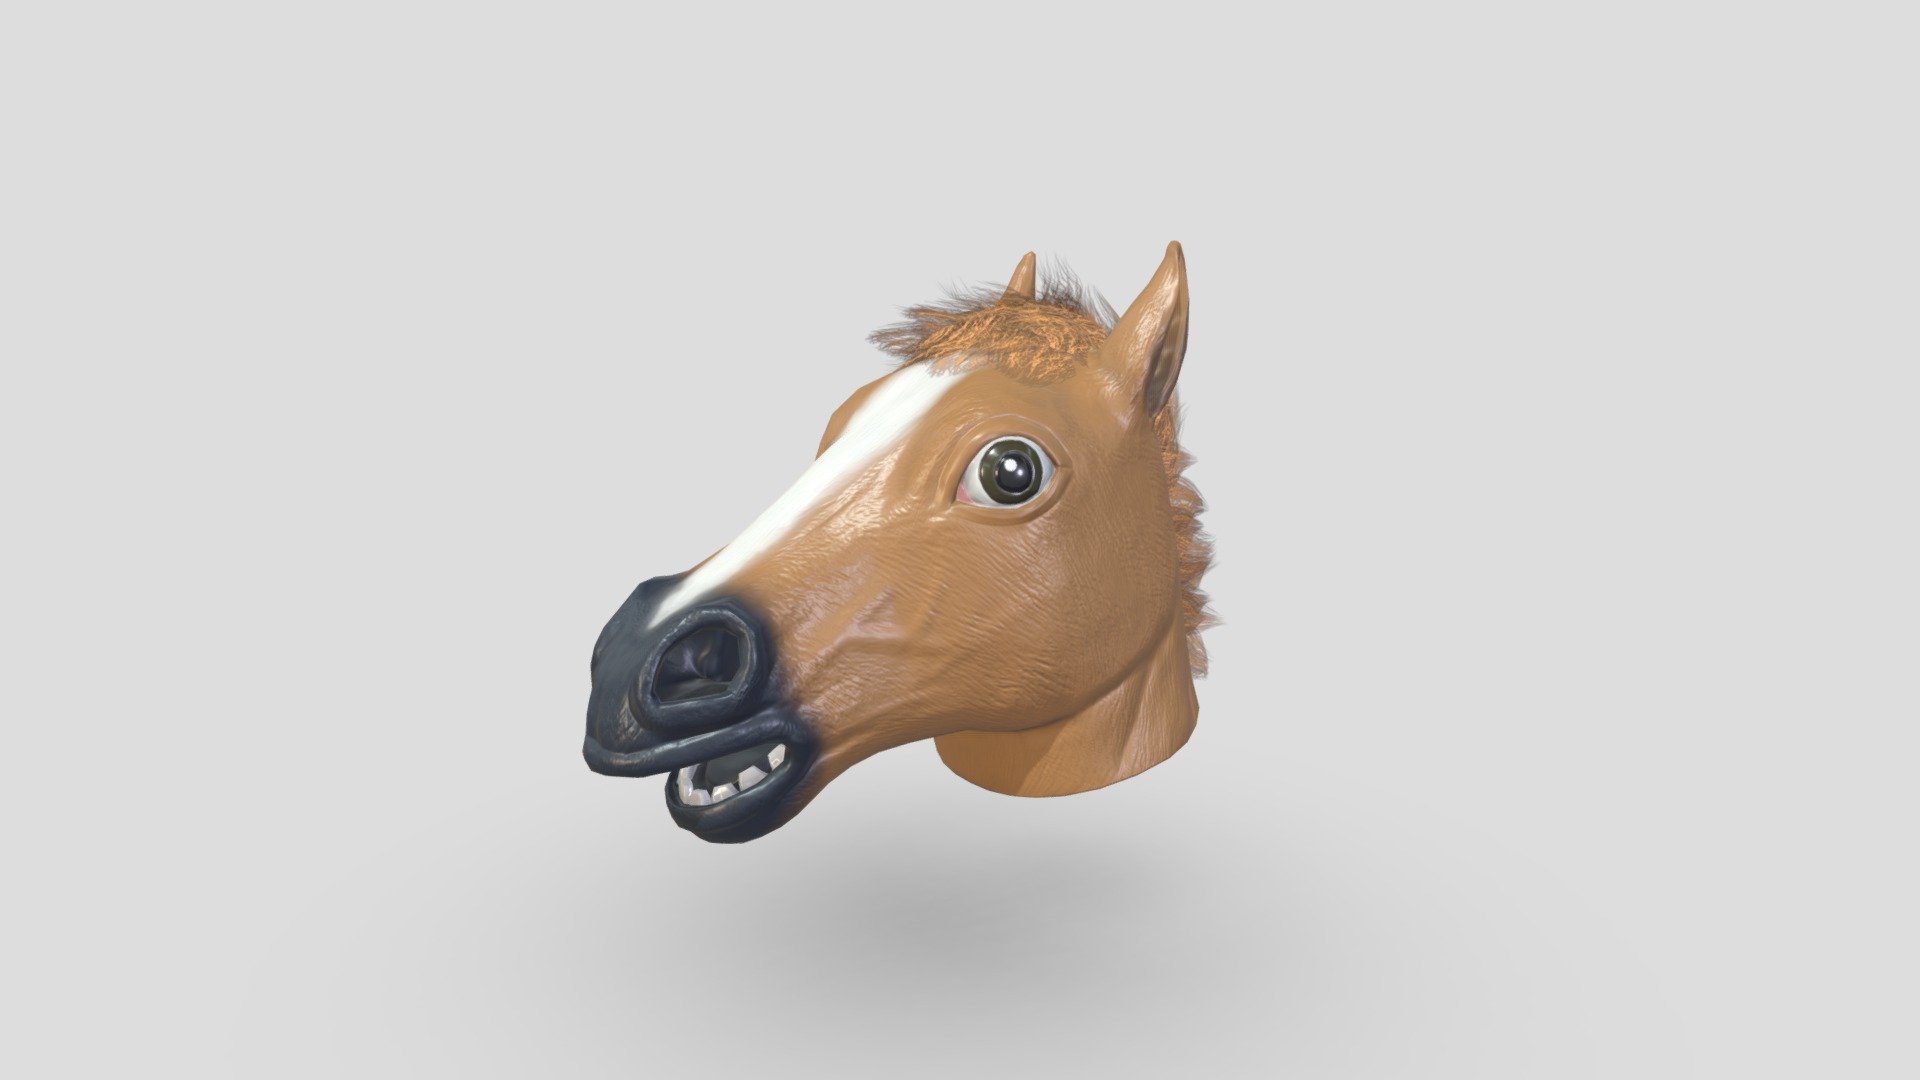 If you need additional work done do not hesitate to contact me, I am available for freelance work.

Funny Rubber Horse Head Mask in brown for a character in disguise. 

Highpoly sculpted in Nomadsculpt. Lowpoly made in Blender. Model and Concept by Me, Enya Gerber 3d model